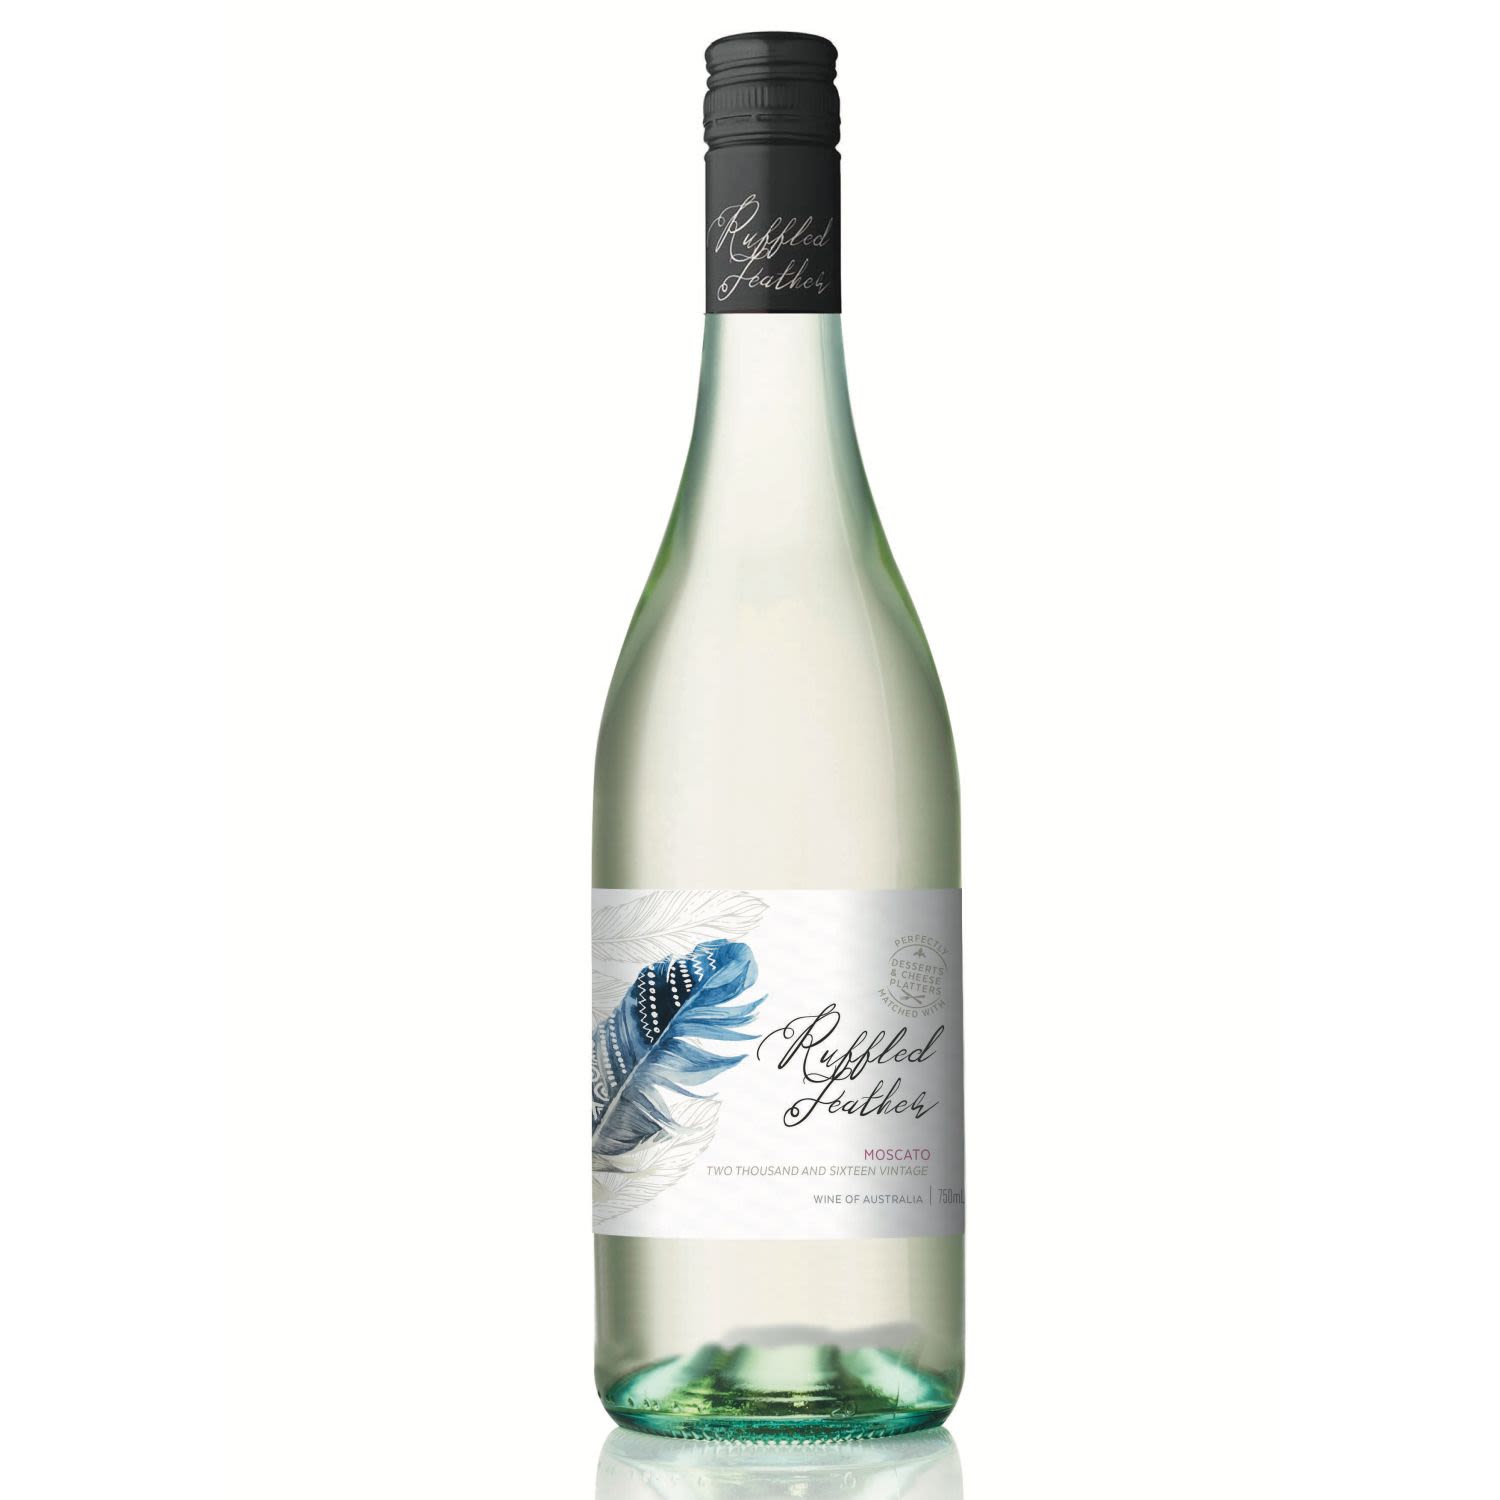 The Ruffled Feather Moscato offers an exciting take on the traditional, with flavours that are refreshing and spritzy. Light and sweet, its lively and fresh taste is a winner for any Moscato lover. The perfect accompaniment to spicy cuisine, hard cheese and desserts such as pavlova.<br /> <br />Alcohol Volume: 8.00%<br /><br />Pack Format: Bottle<br /><br />Standard Drinks: 4.7</br /><br />Pack Type: Bottle<br /><br />Country of Origin: Australia<br /><br />Region: South Eastern Australia<br /><br />Vintage: Vintages Vary<br />